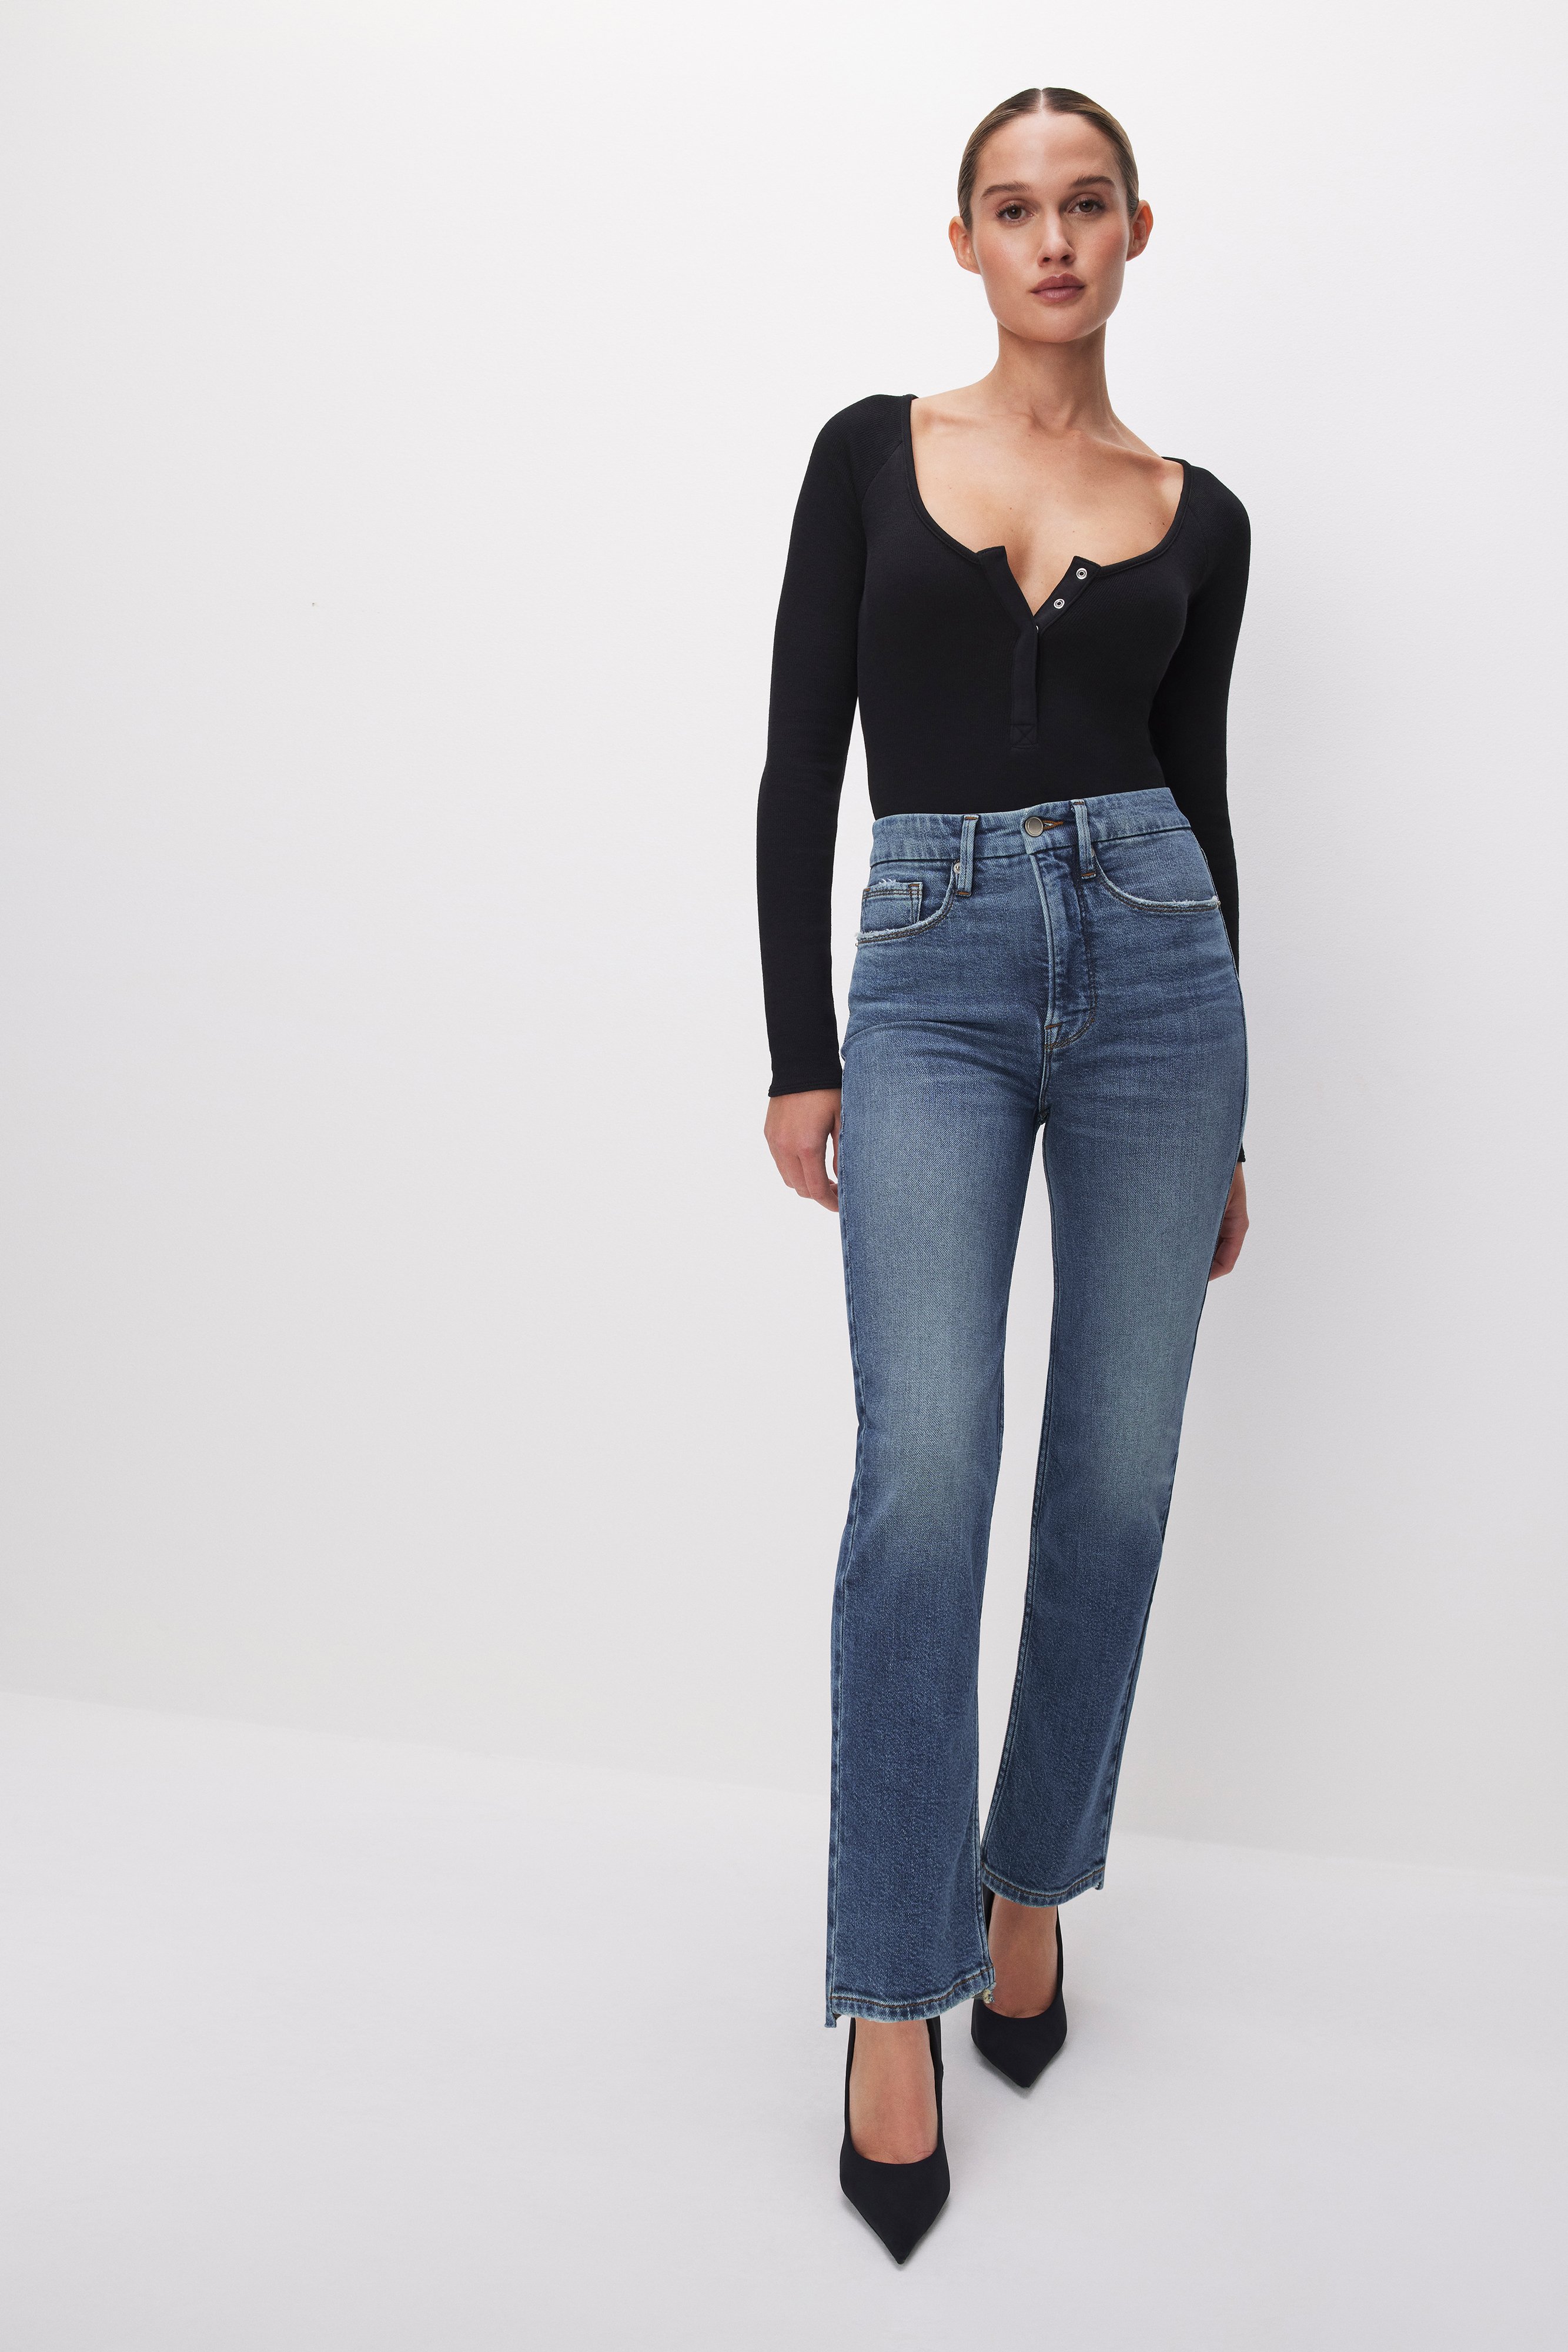 Styled with GOOD BOY STRAIGHT CROPPED JEANS | INDIGO604